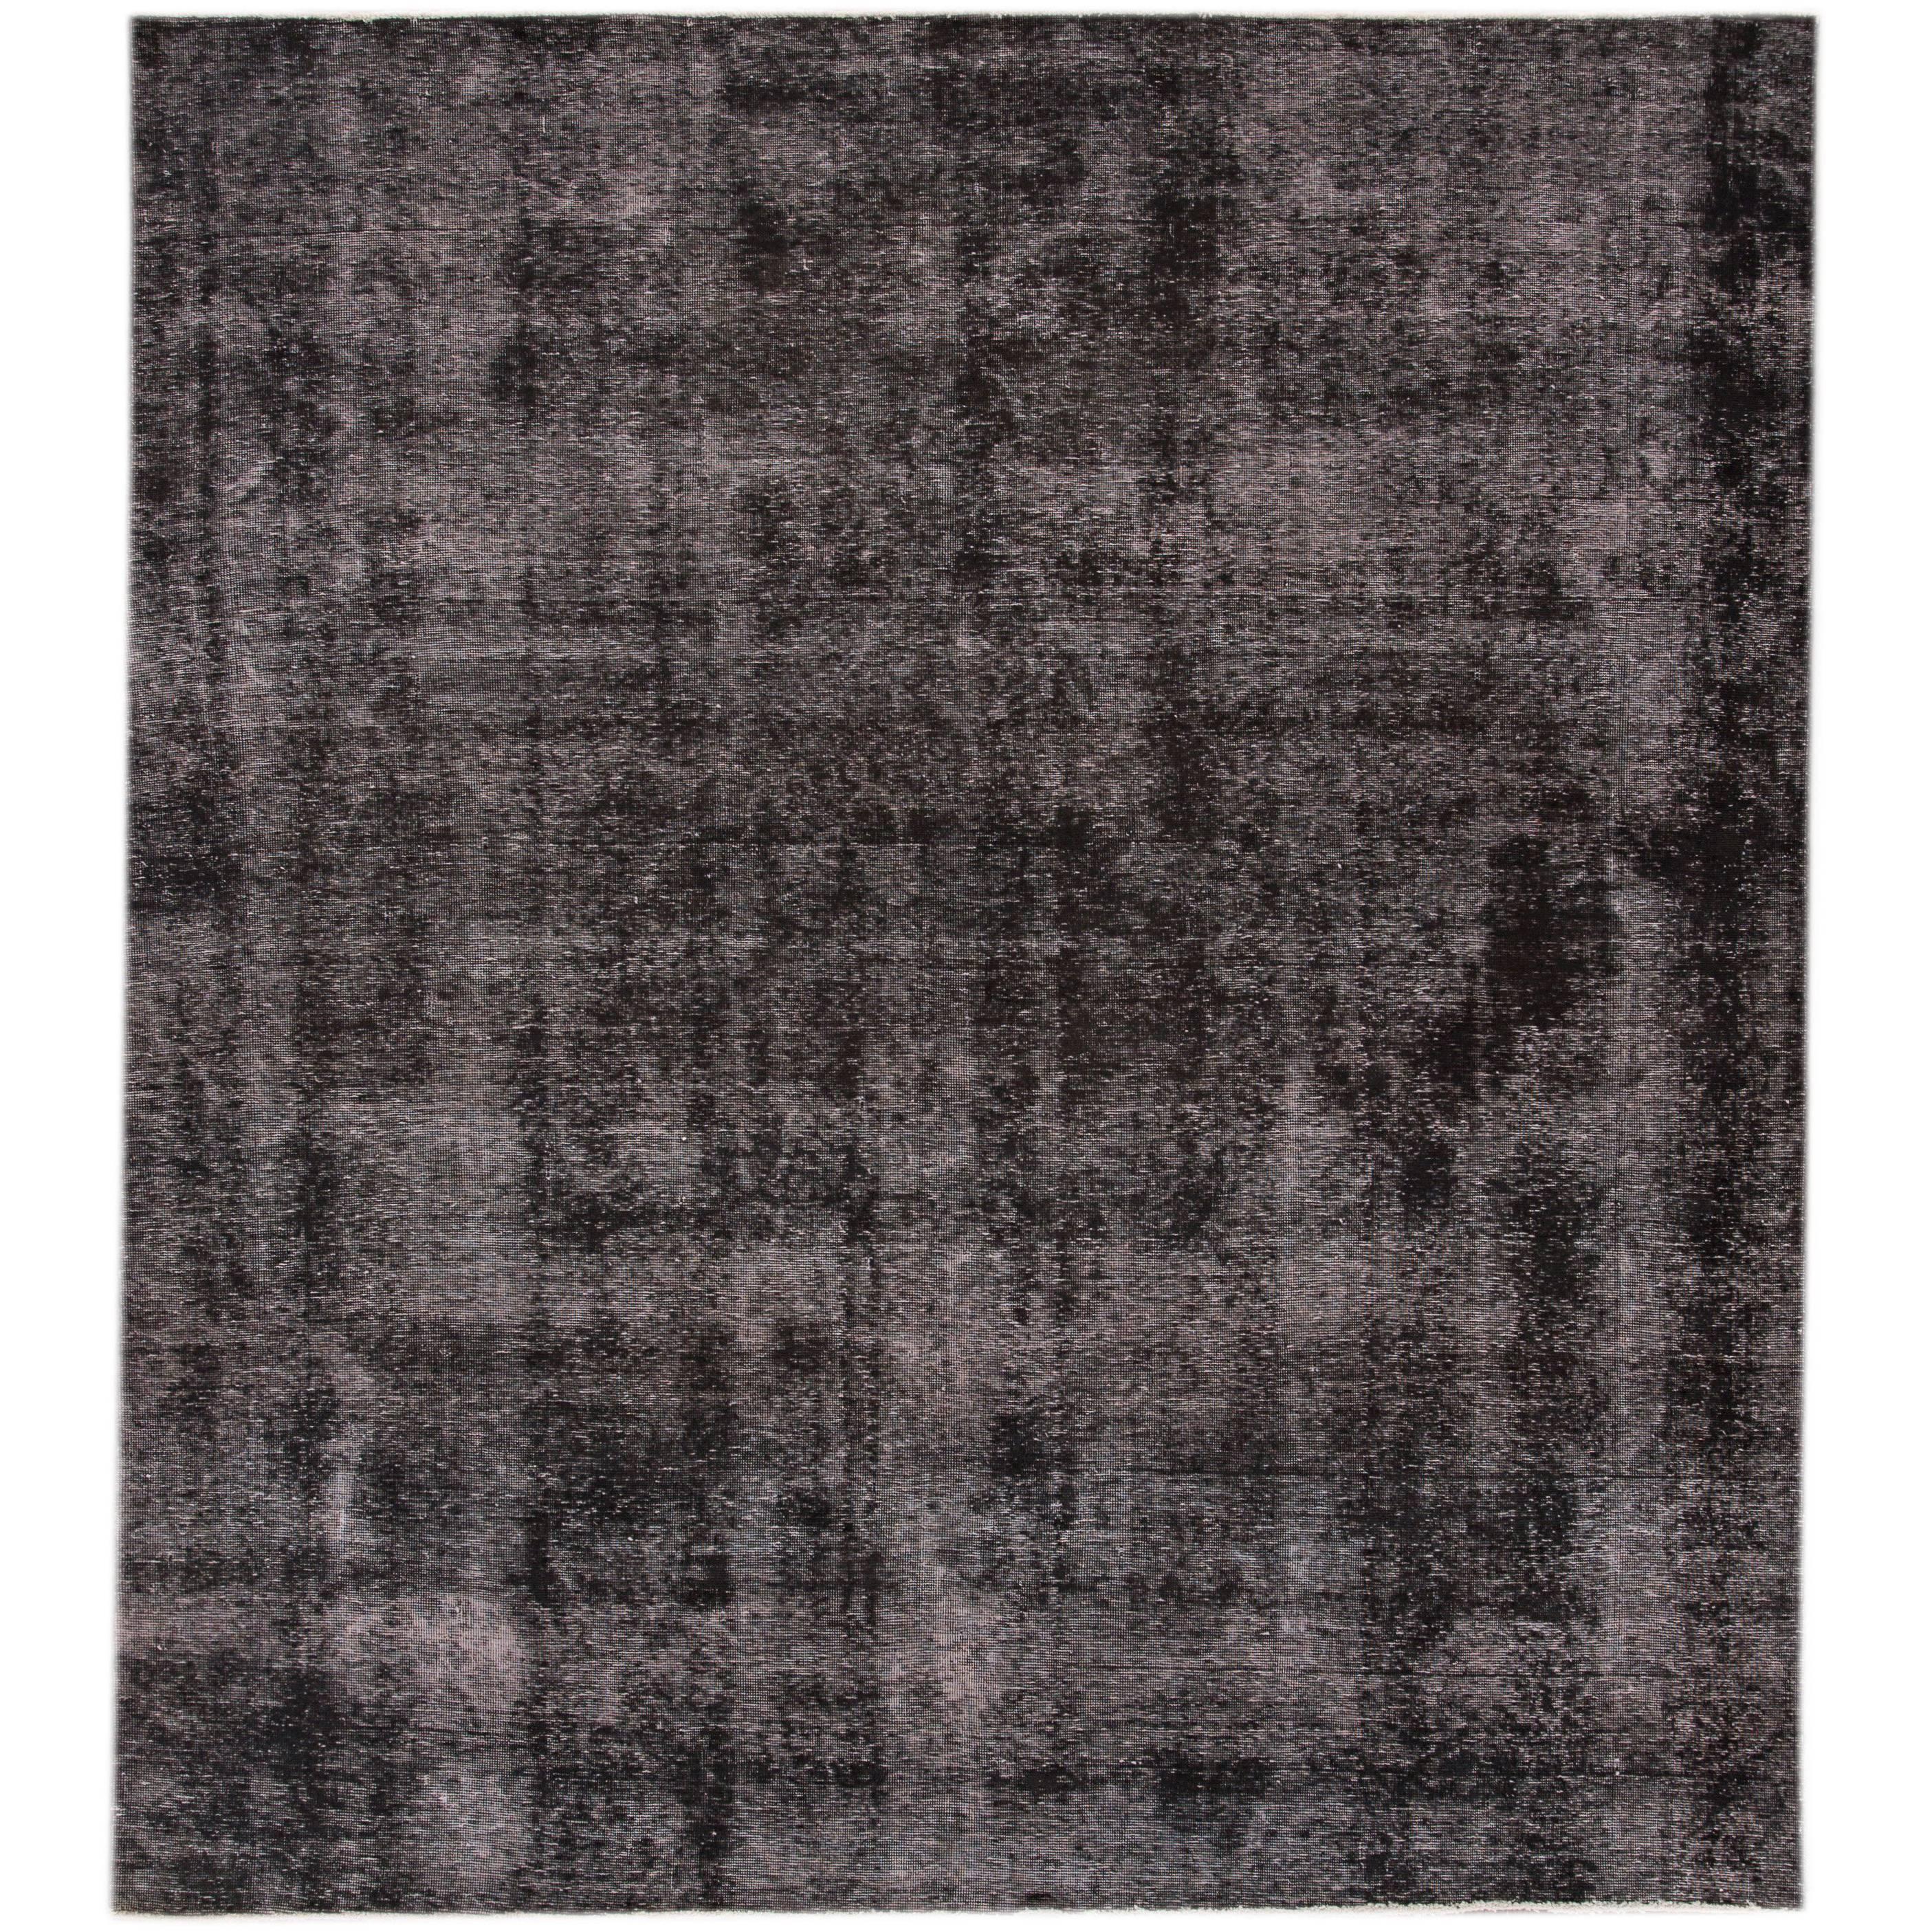 Beautifully Designed Square Overdyed Rug For Sale